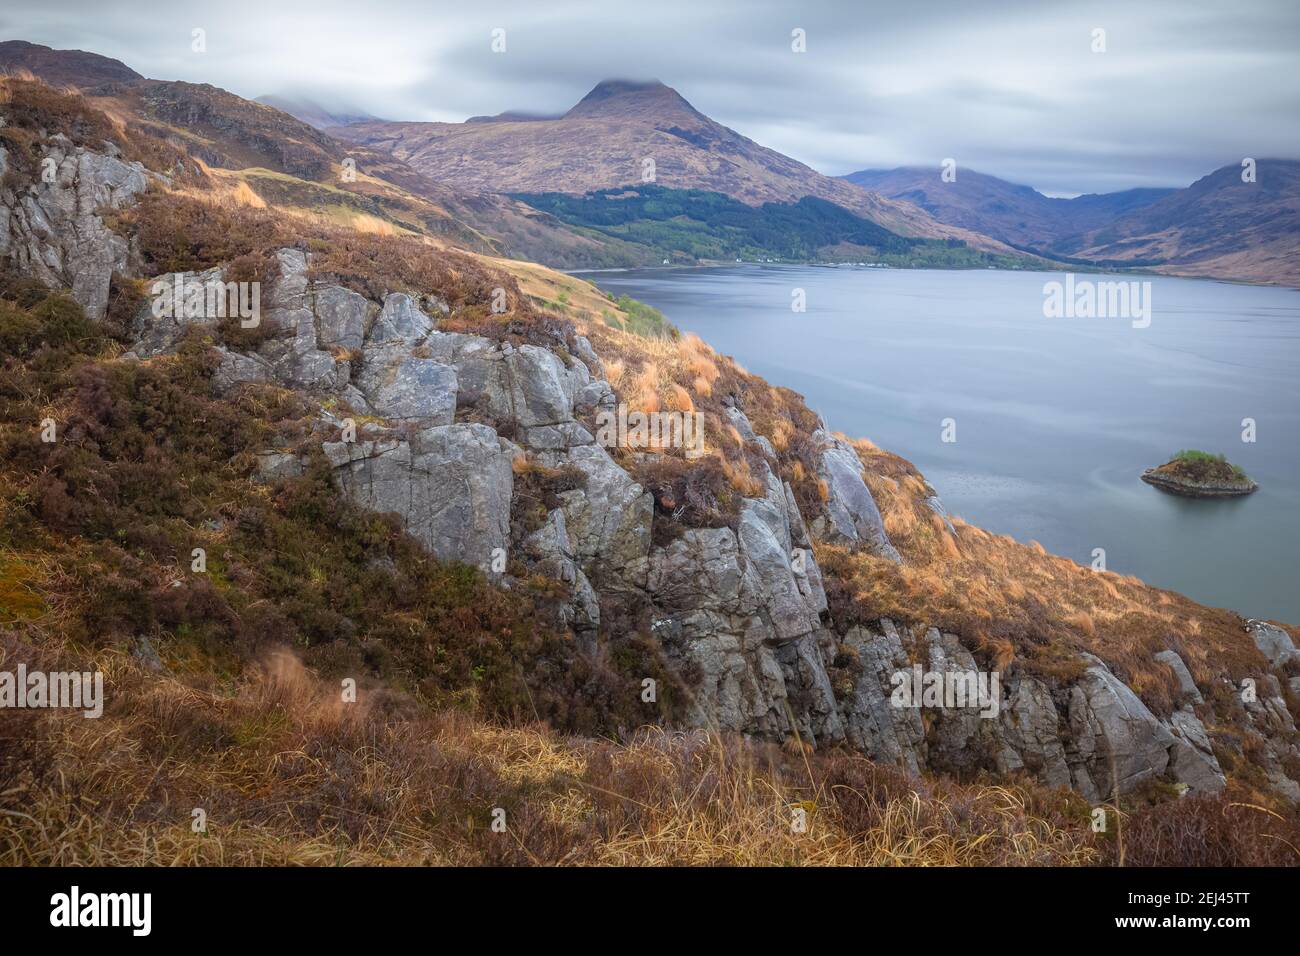 View over Loch Nevis from the remote, rugged Scottish Highlands landscape of Knoydart peninsula, west coast of Scotland. Stock Photo